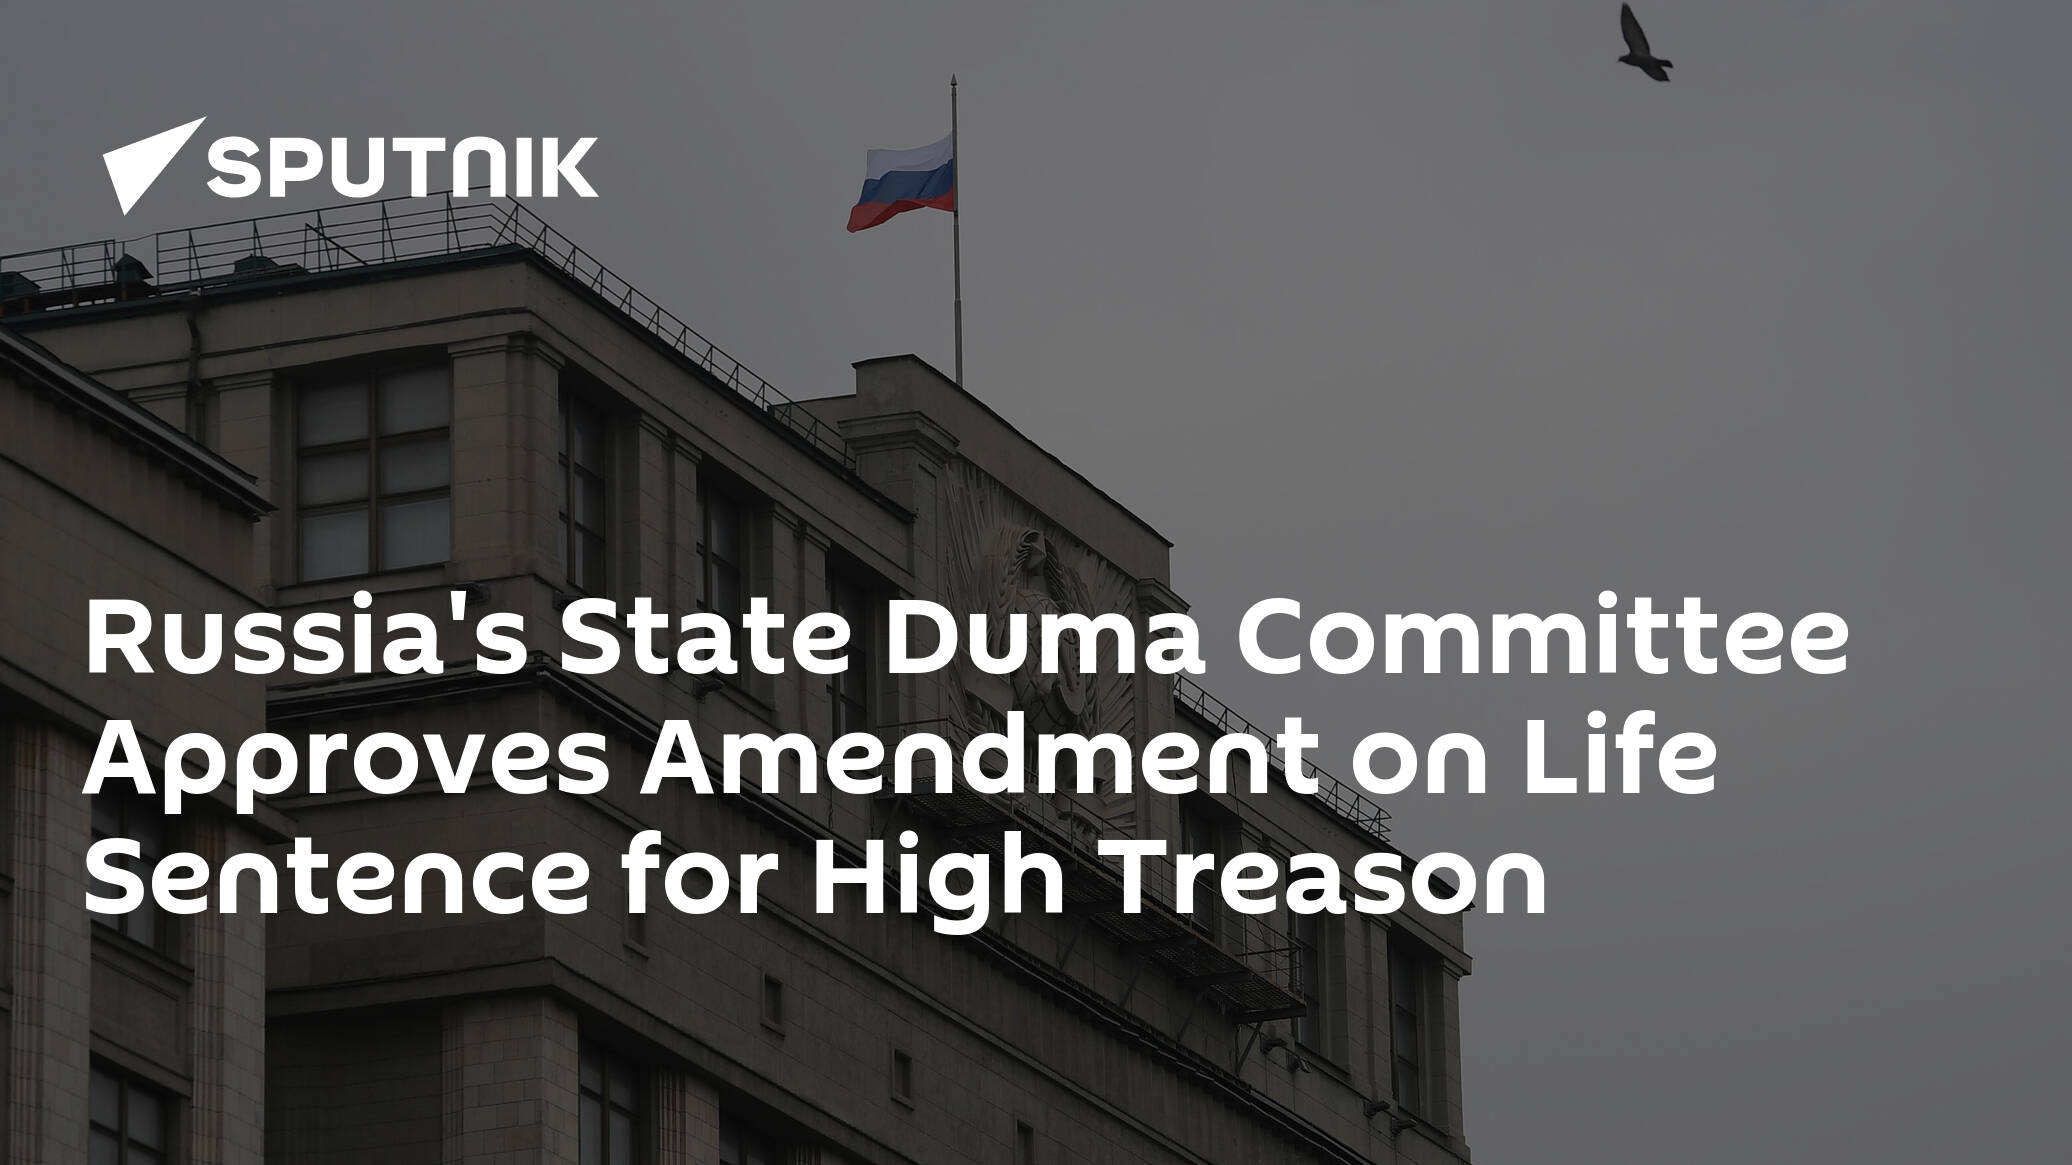 Russia's State Duma Committee Approves Amendment on Life Sentence for High Treason